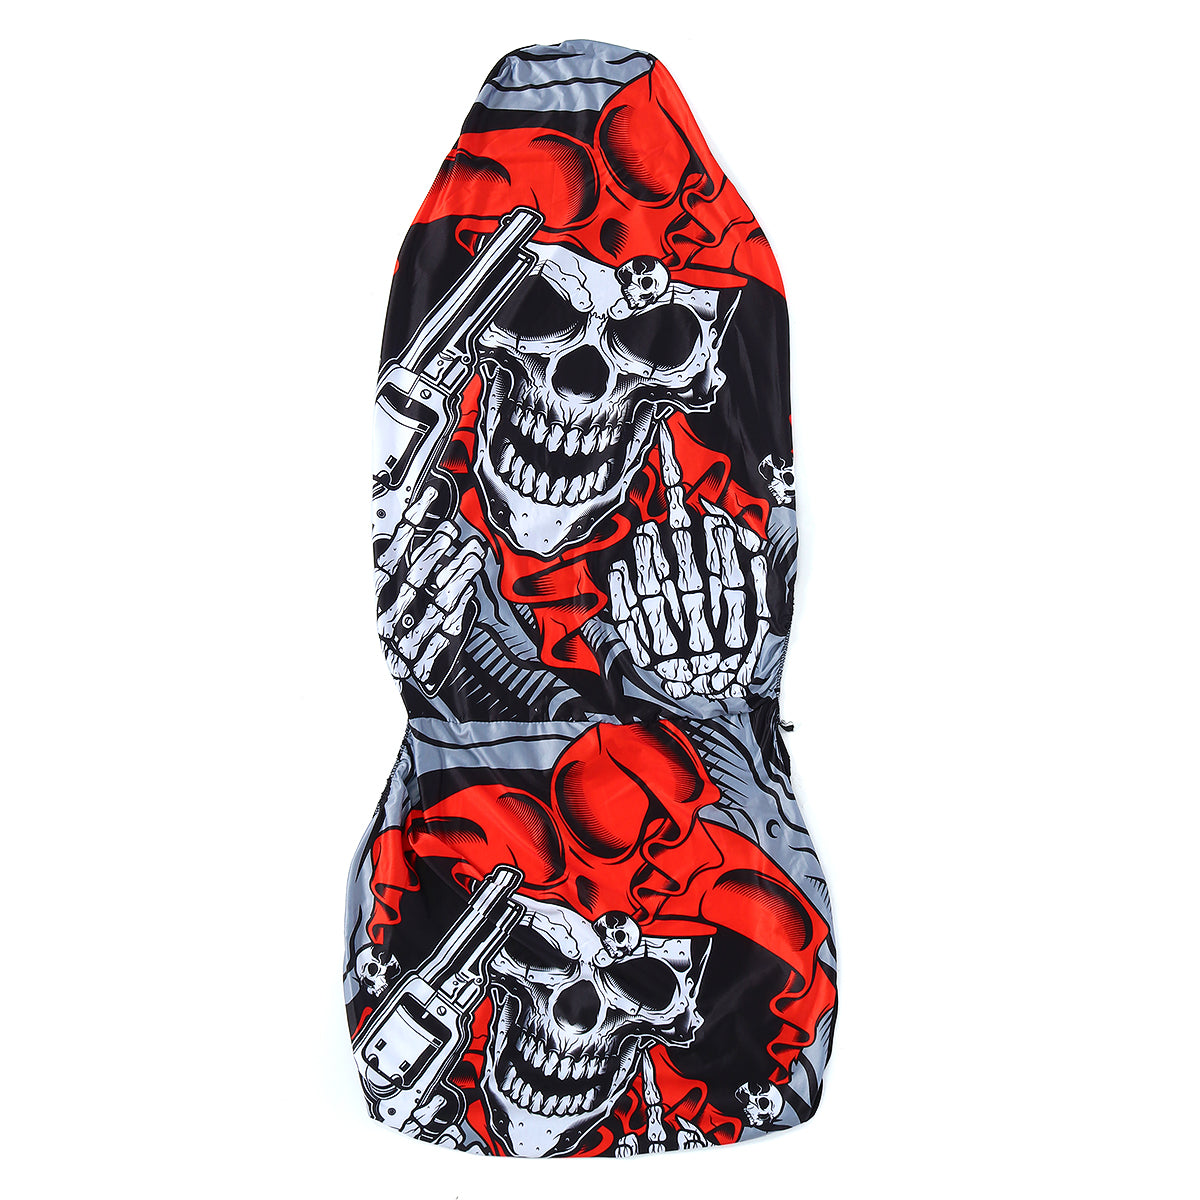 1/2Pcs Skull Front Car Seat Cover Protector Vehicles Interior Cushions Universal - Auto GoShop